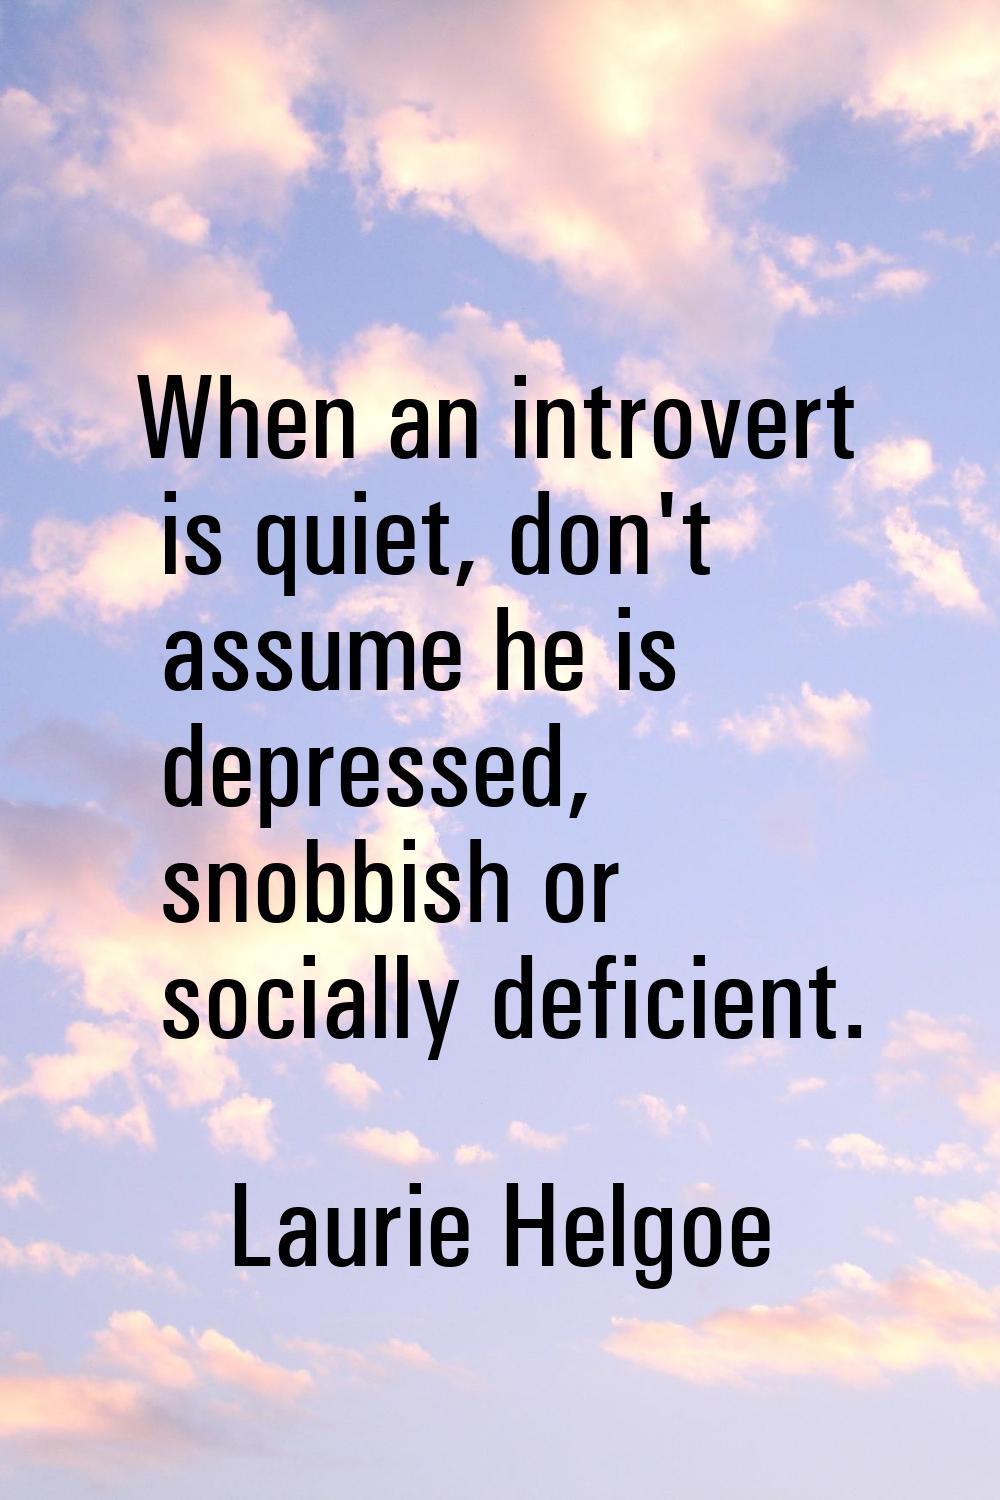 When an introvert is quiet, don't assume he is depressed, snobbish or socially deficient.